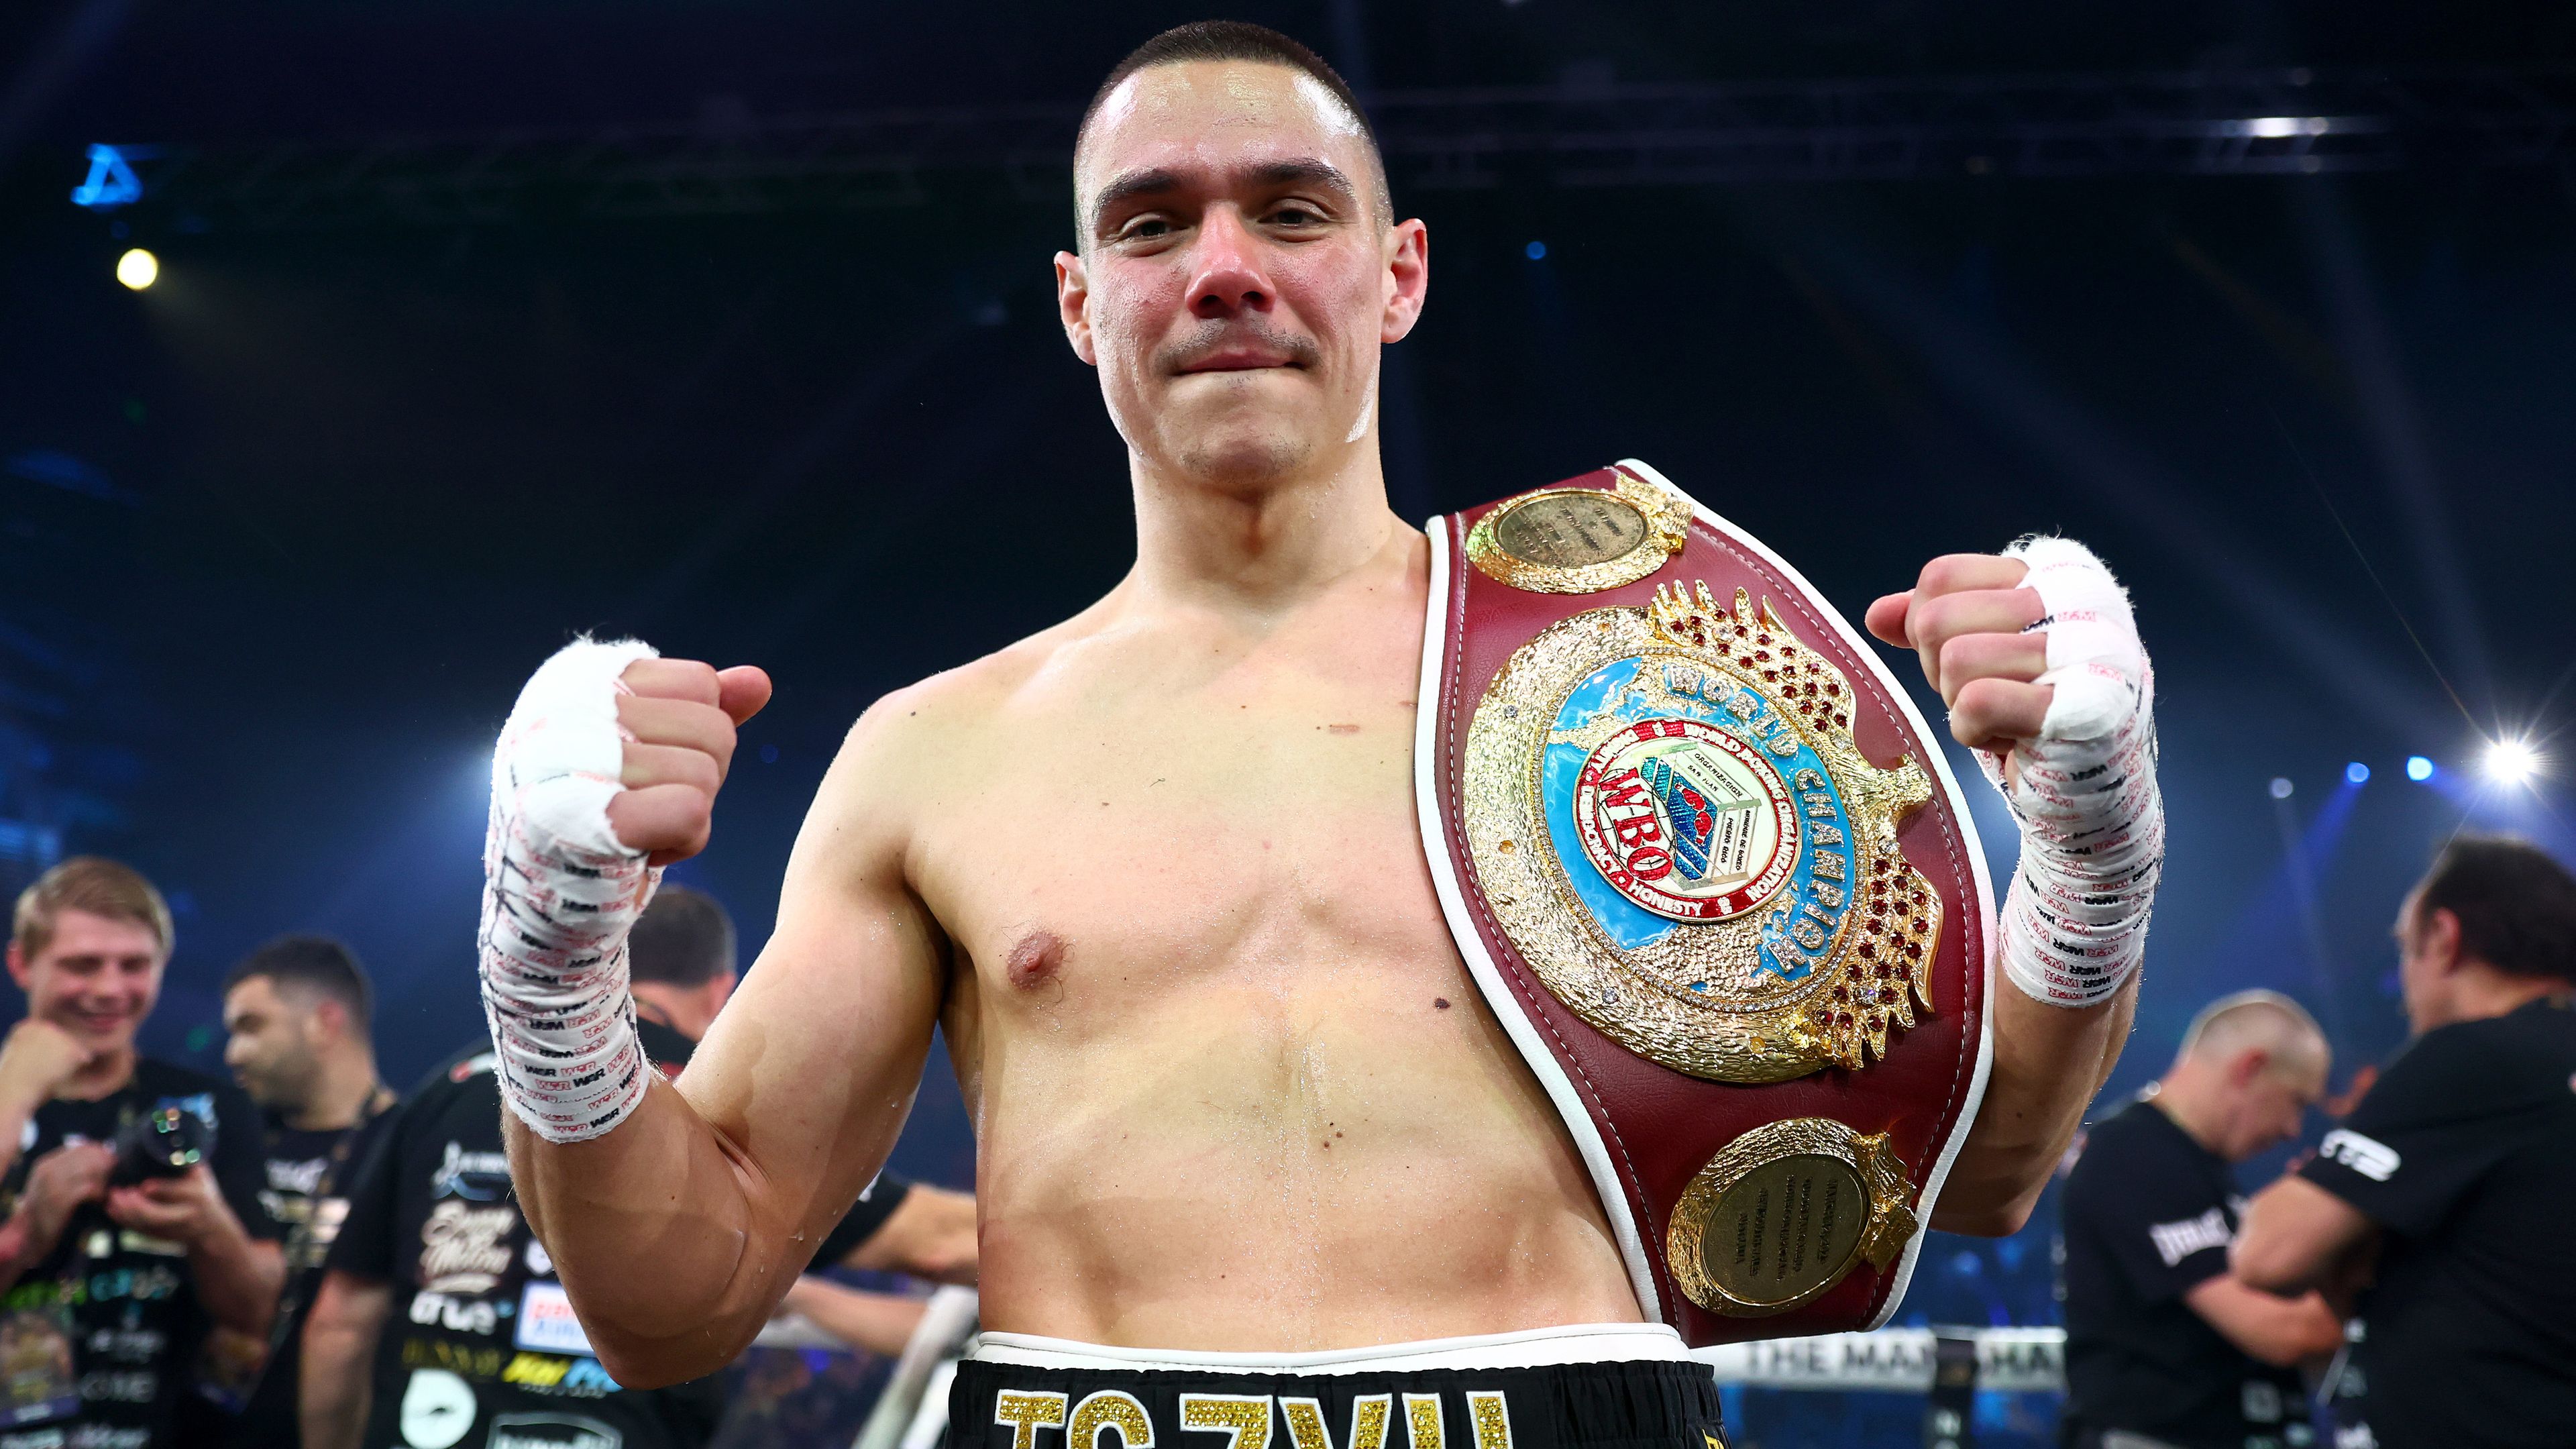 Tim Tszyu poses with the interim title belt after his win over Carlos Ocampo